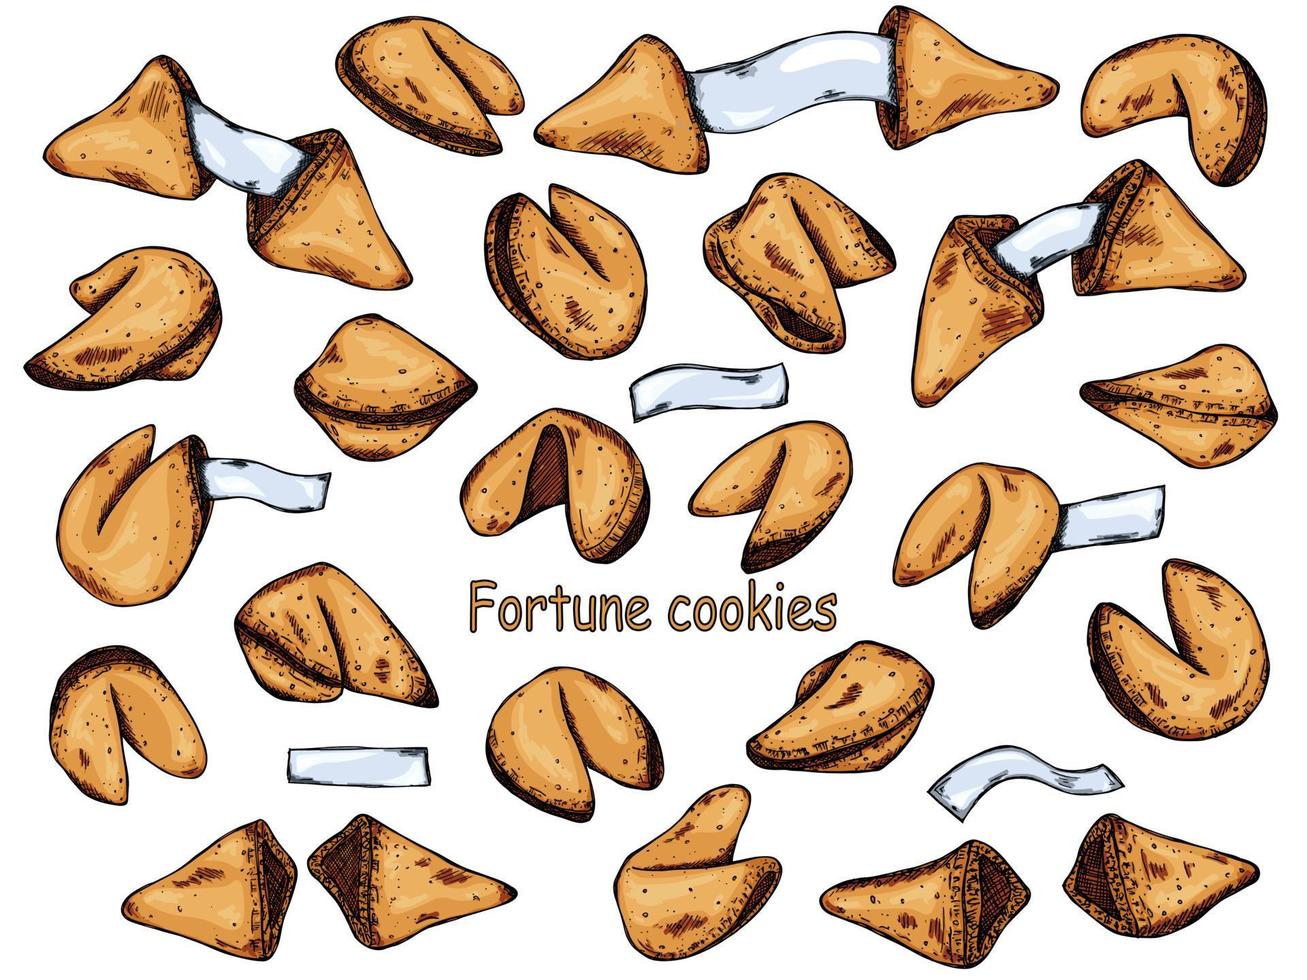 Chinese fortune cookies vector hand drawn set isolated on white backgrounds. Colorful food illustration. Crisp cookie with a blank piece of paper inside. For print, web, design, decor, logo.